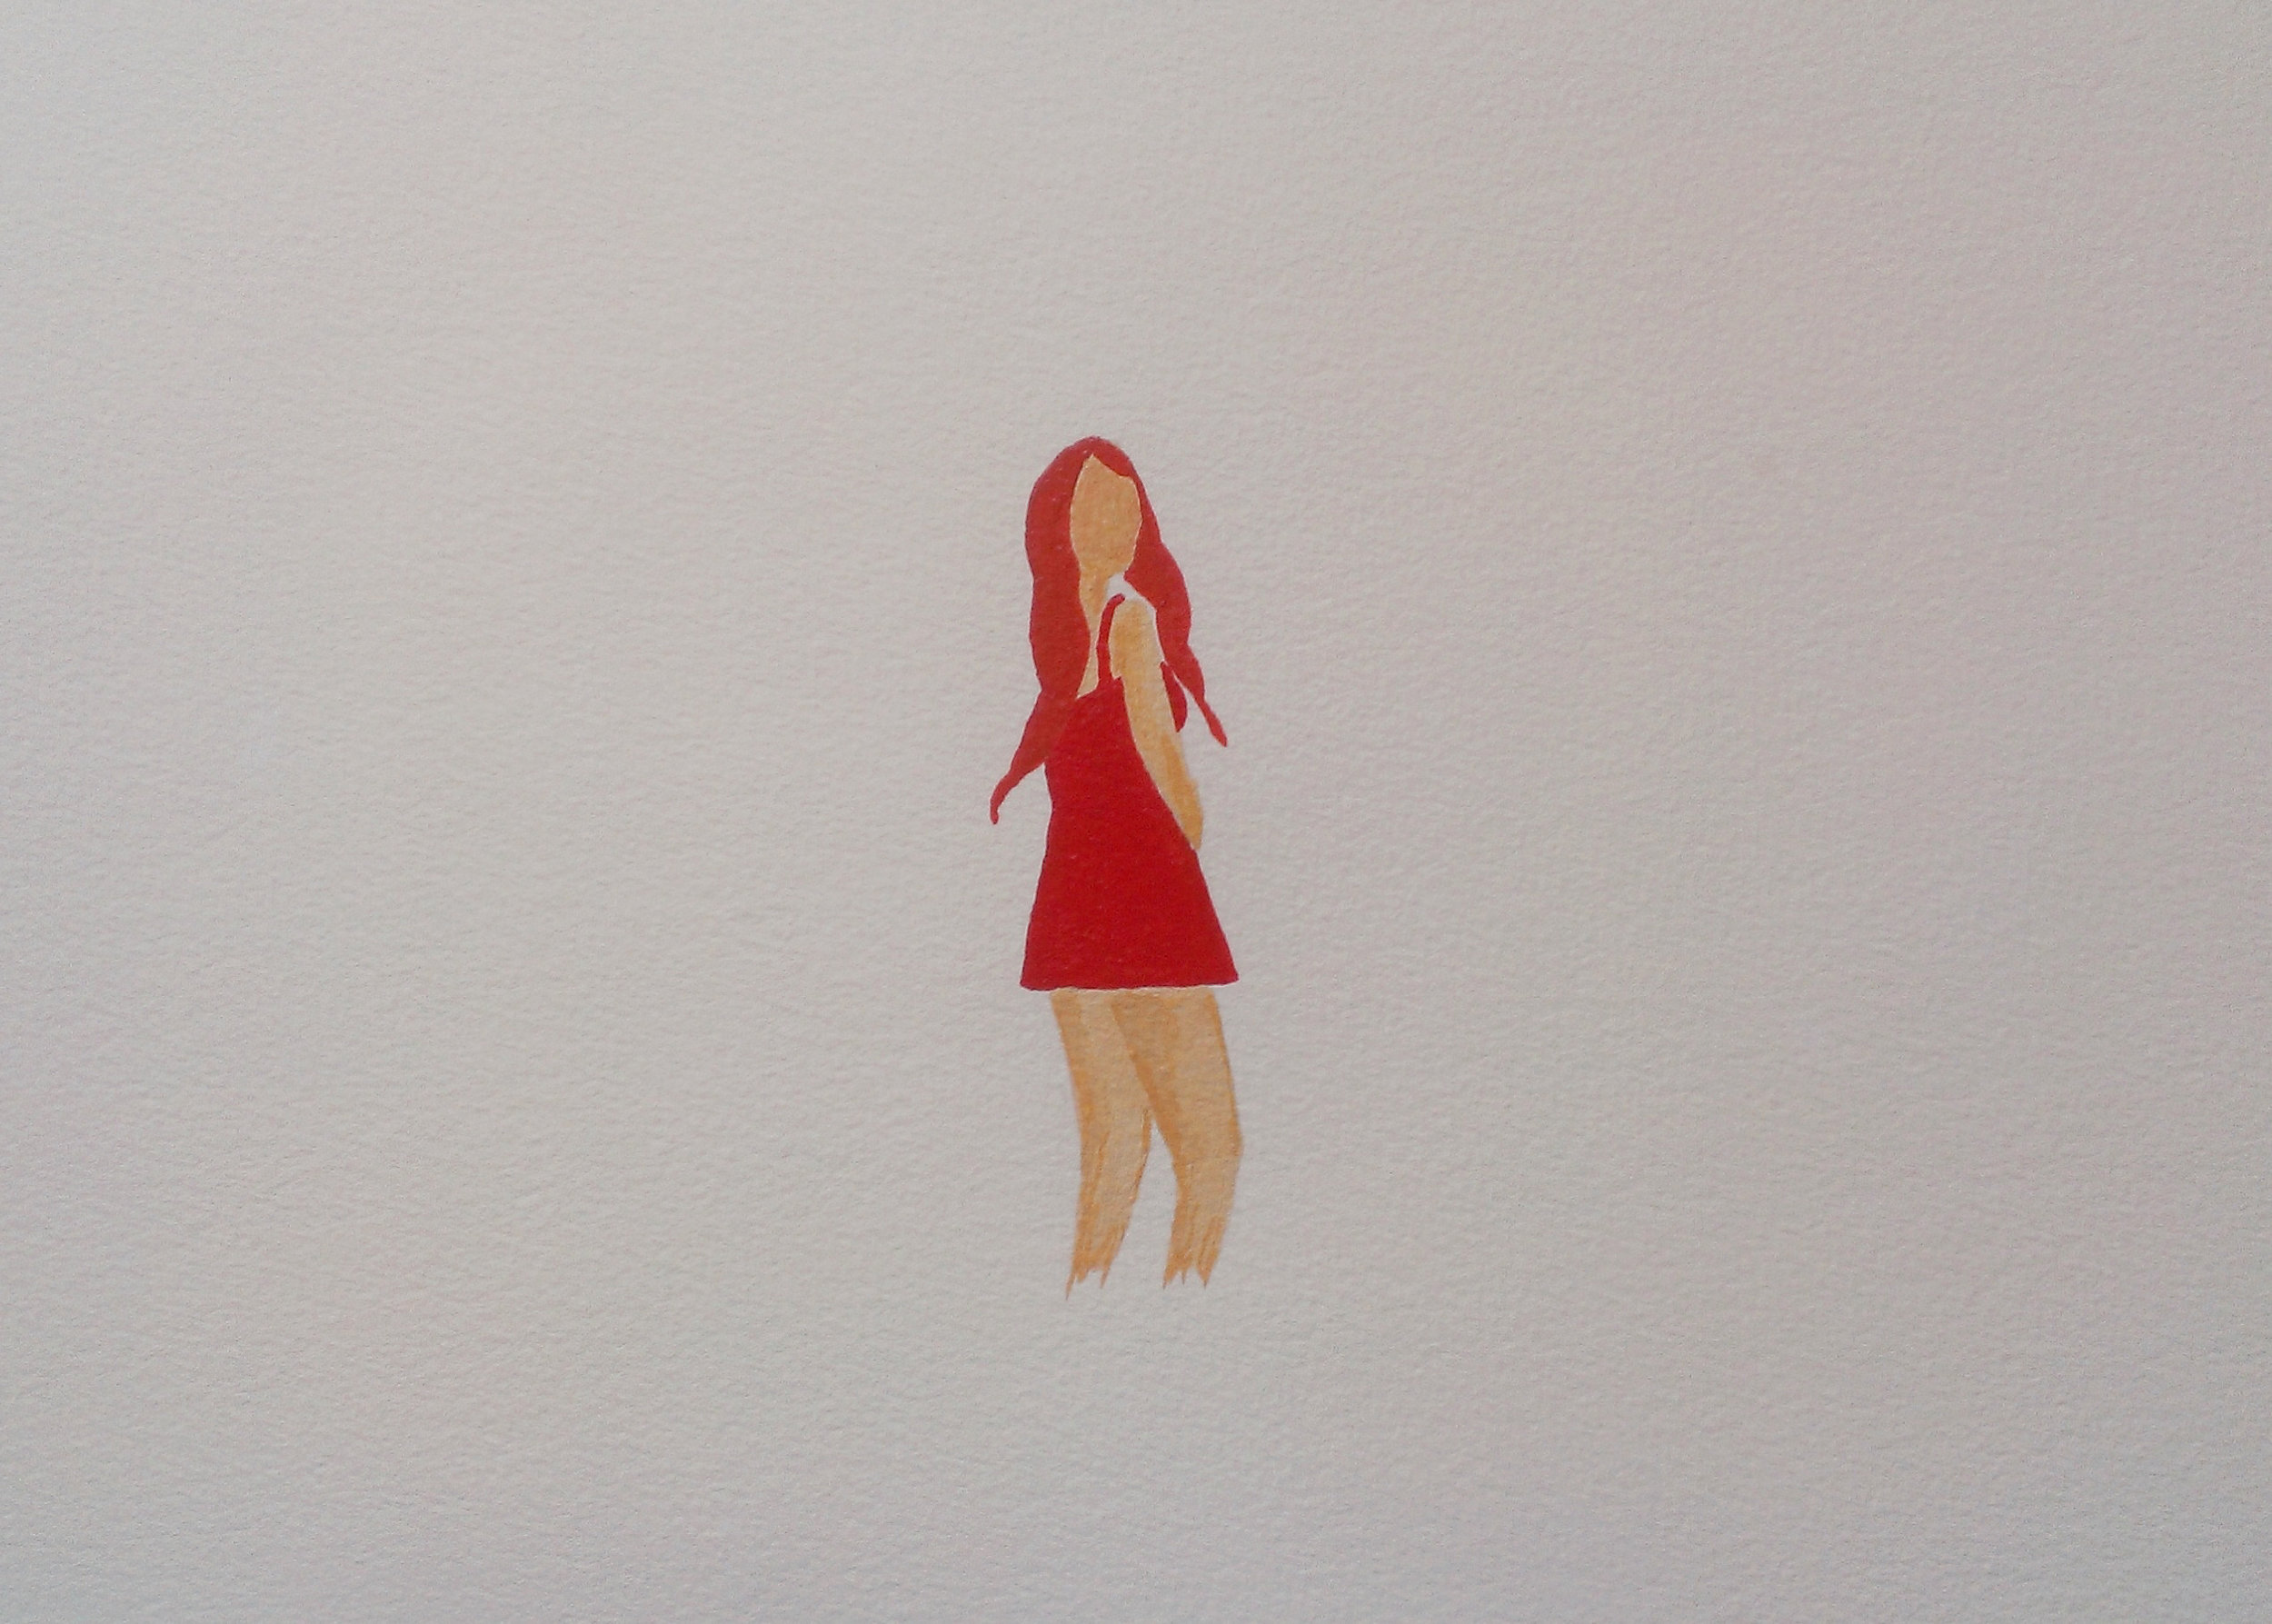   the lady in red   acrylic on paper  11" x 15"  2014 